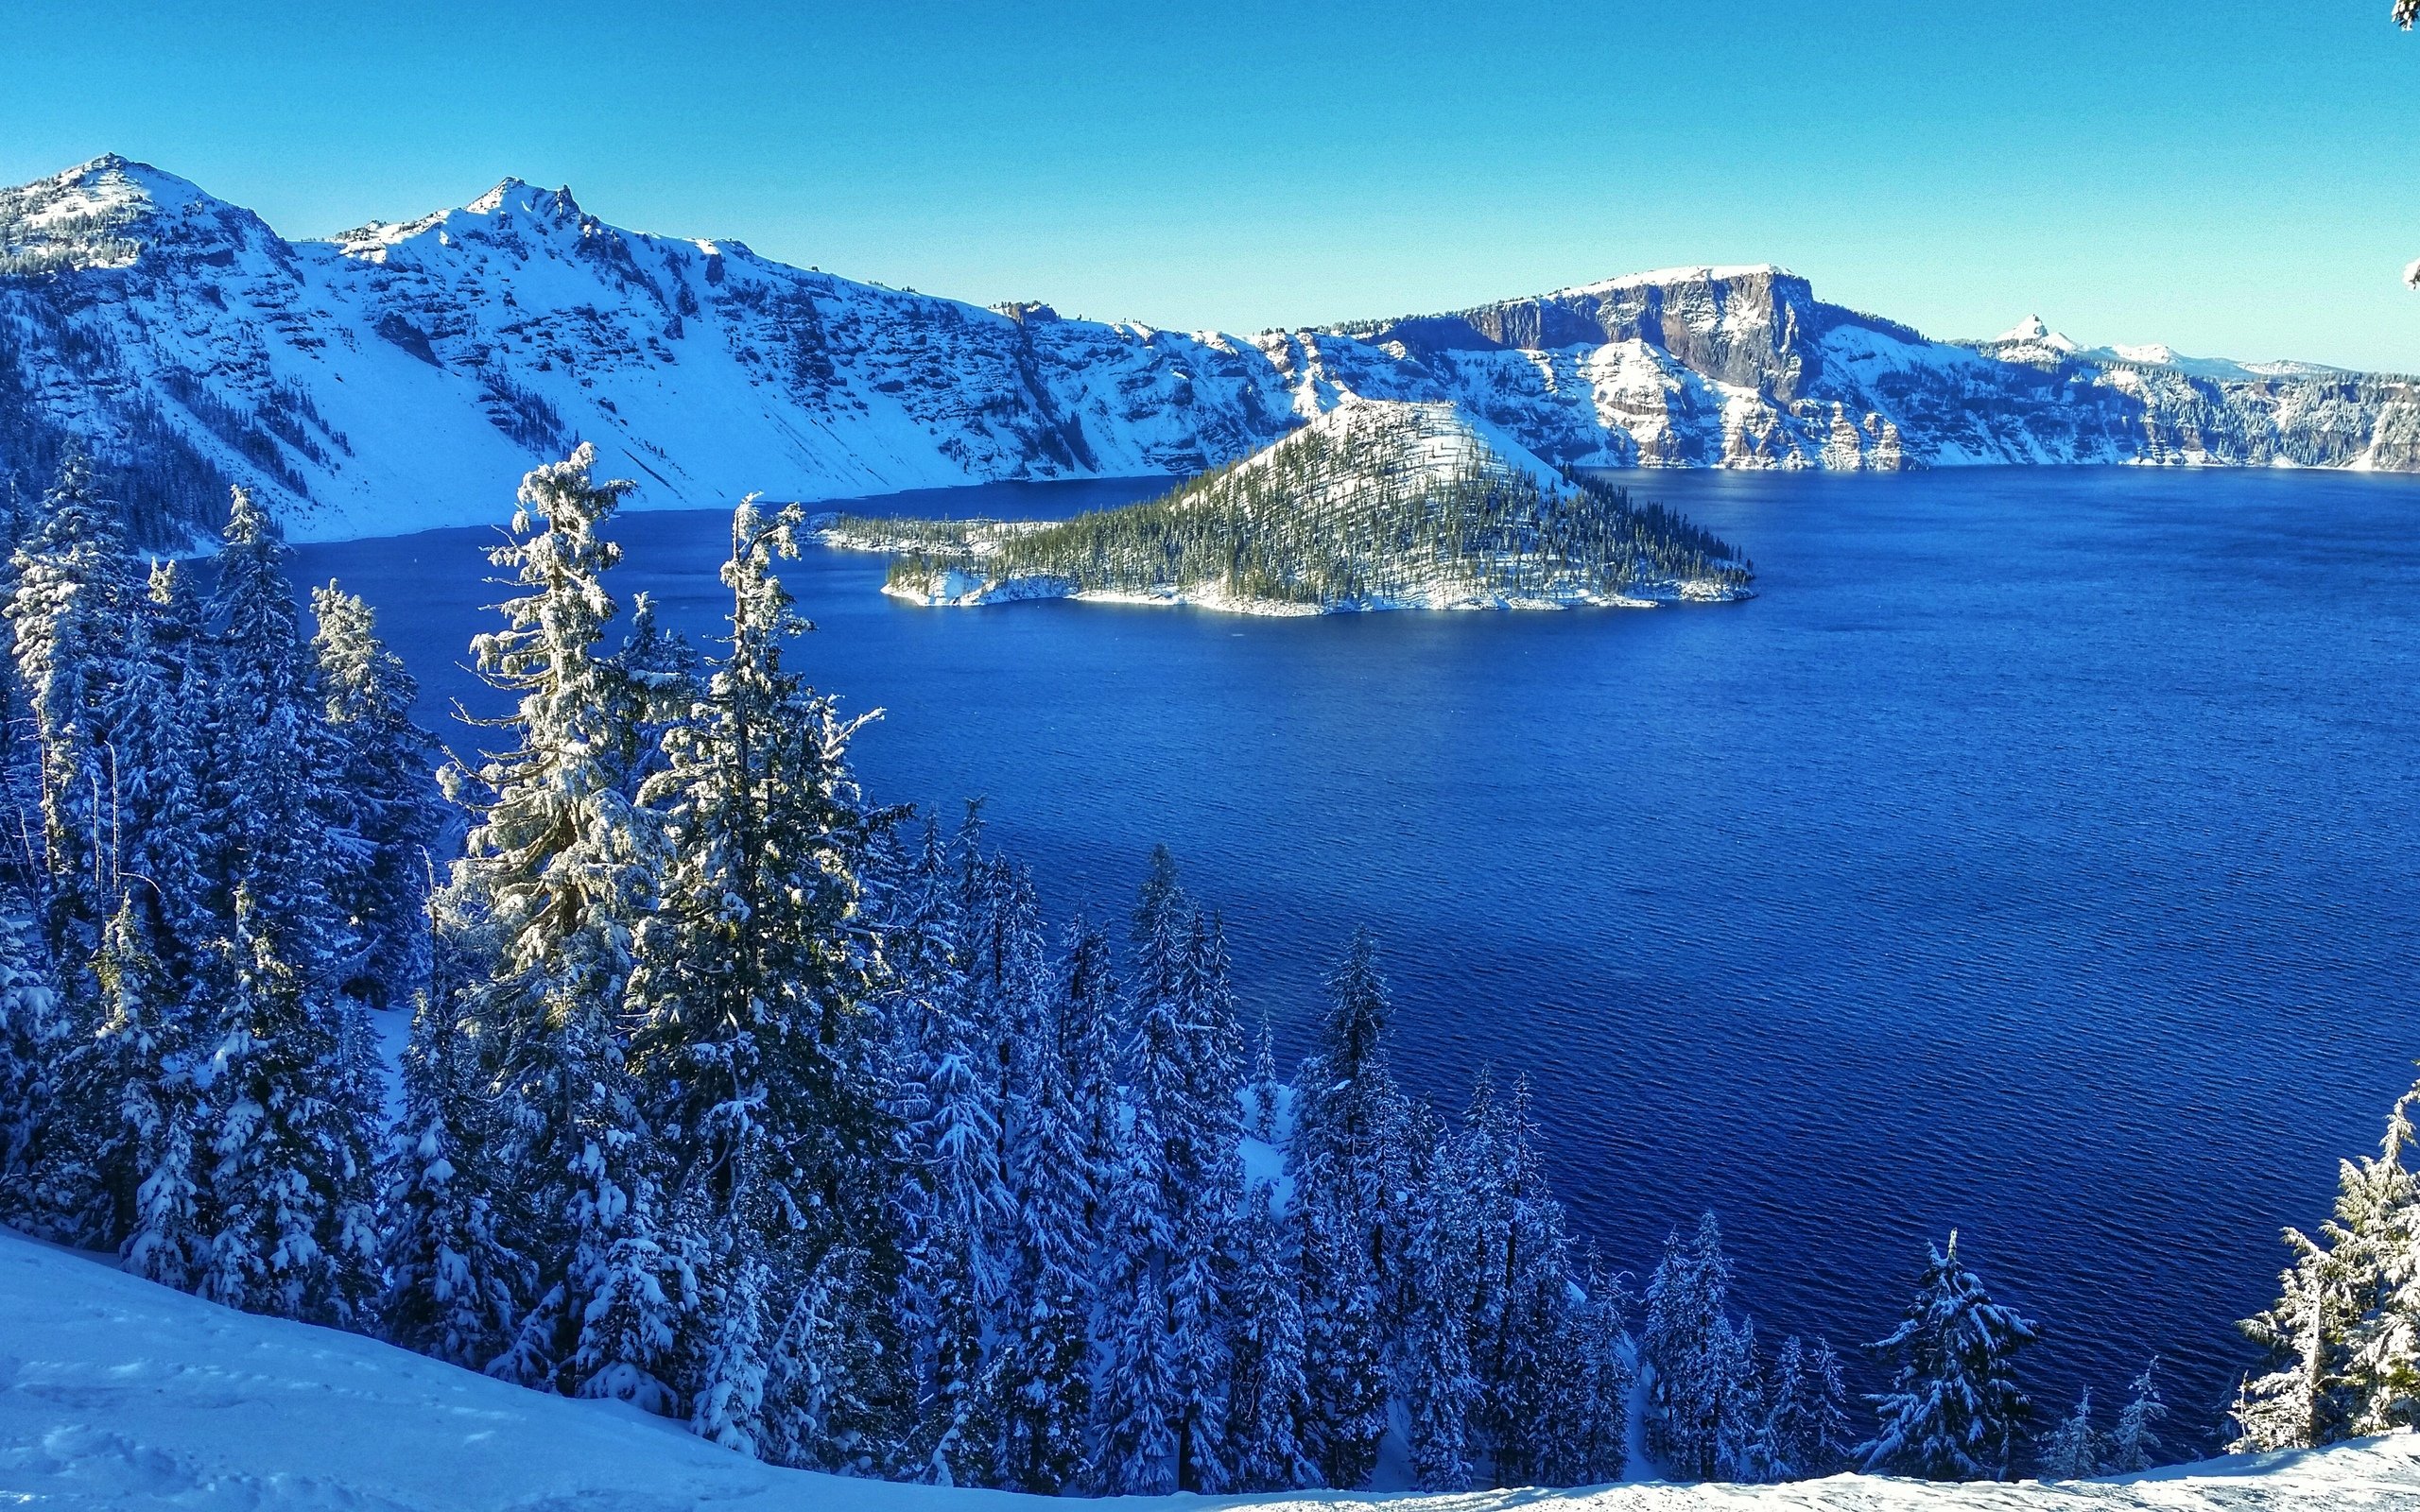 crater, Lake, Winter, Lake, Island, Forest, Trees, Landscape Wallpaper